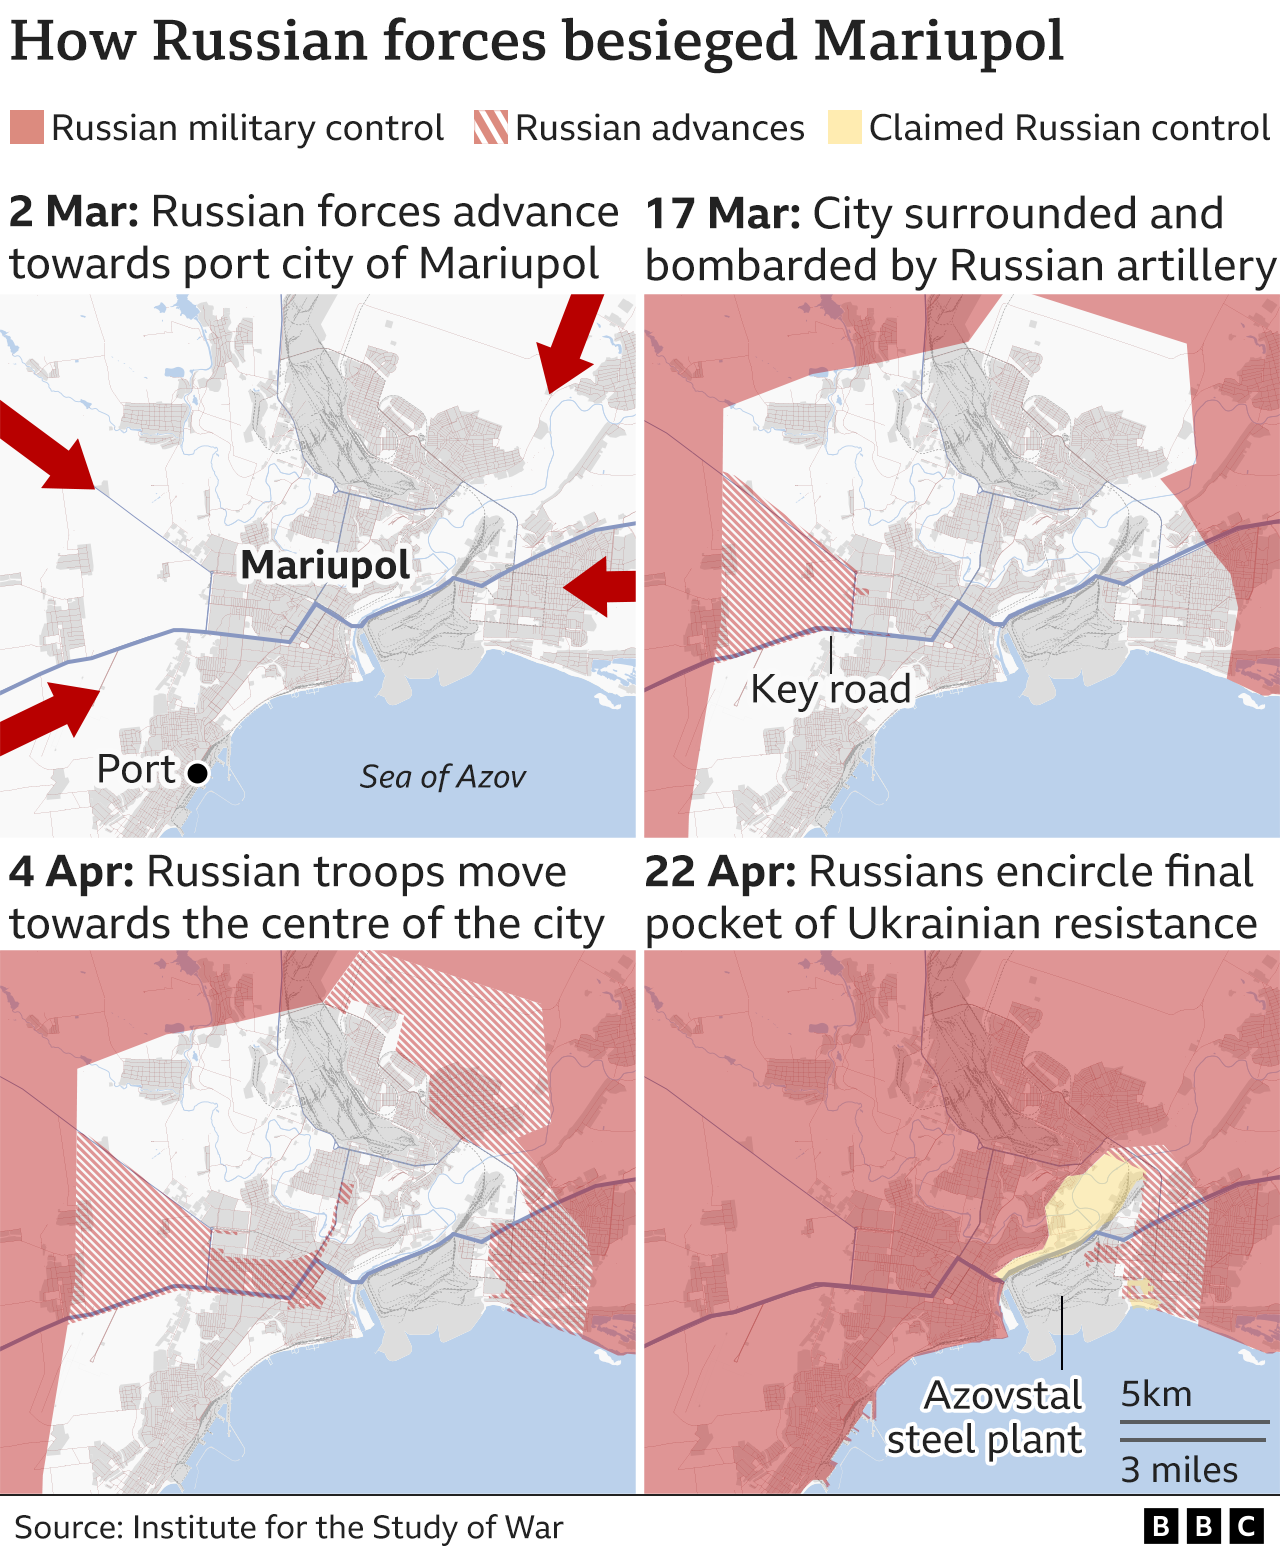 Graphic: How Russian forces besieged Mariupol